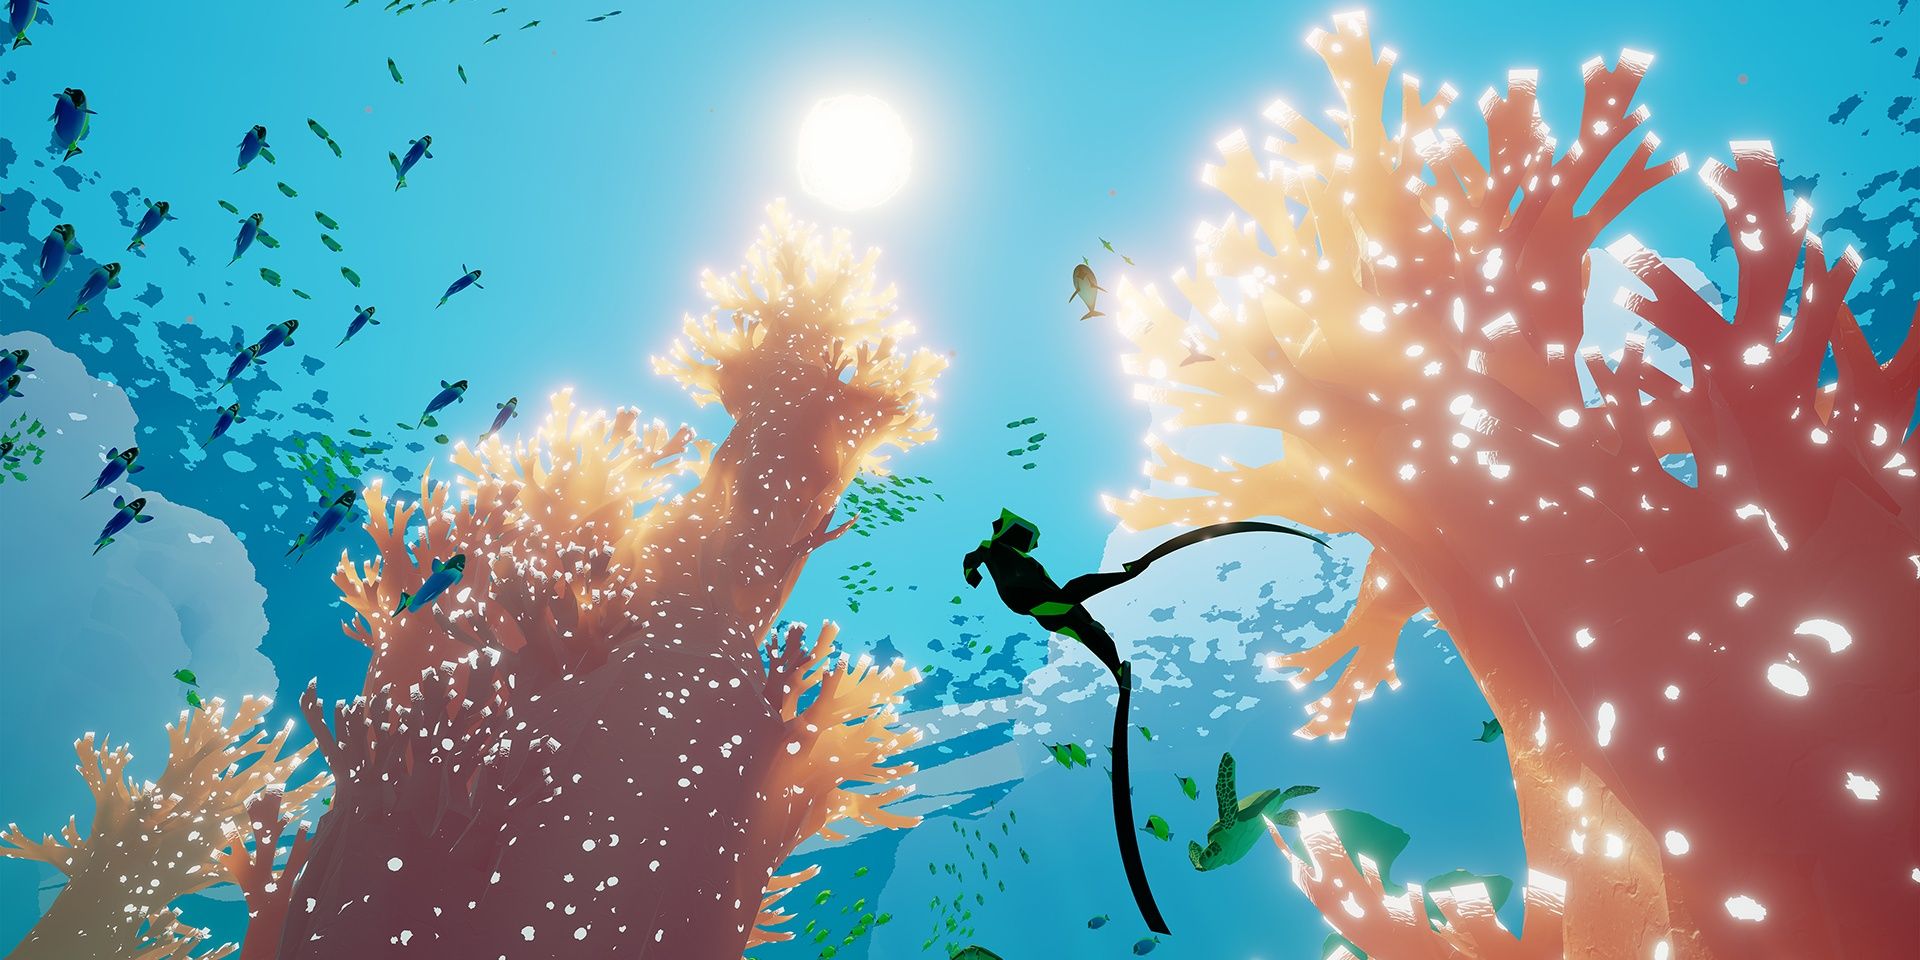 The diver in Abzu swimming upwards towards the surface while fish and turtles swim in the background